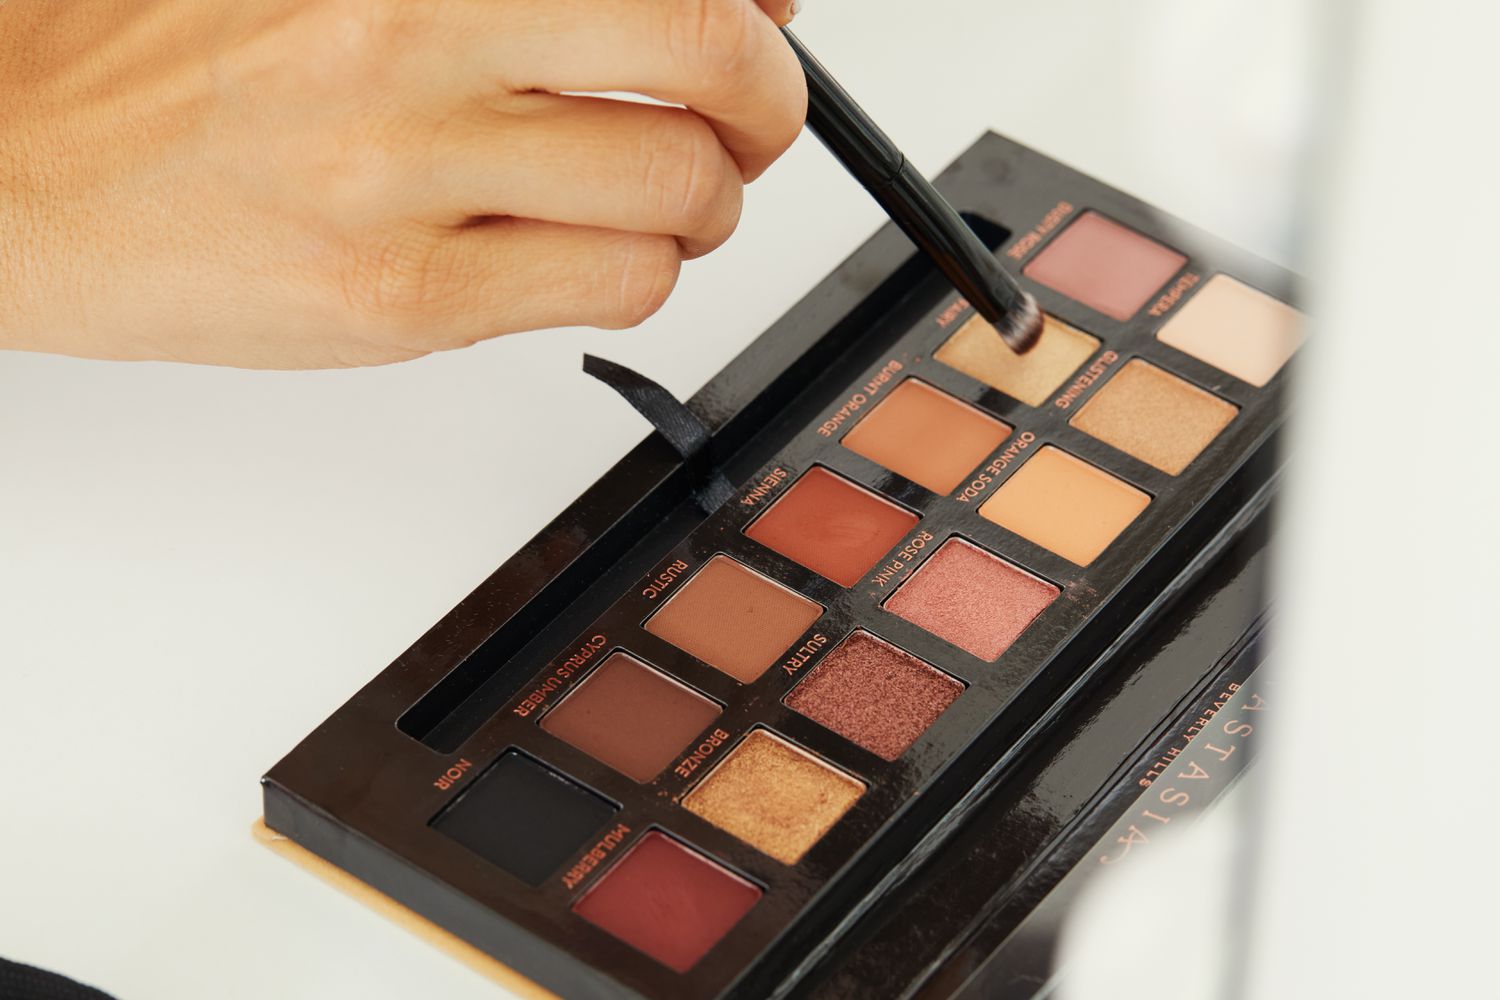 The 9 Best Eyeshadow Palettes That Make Your Eyes Pop
